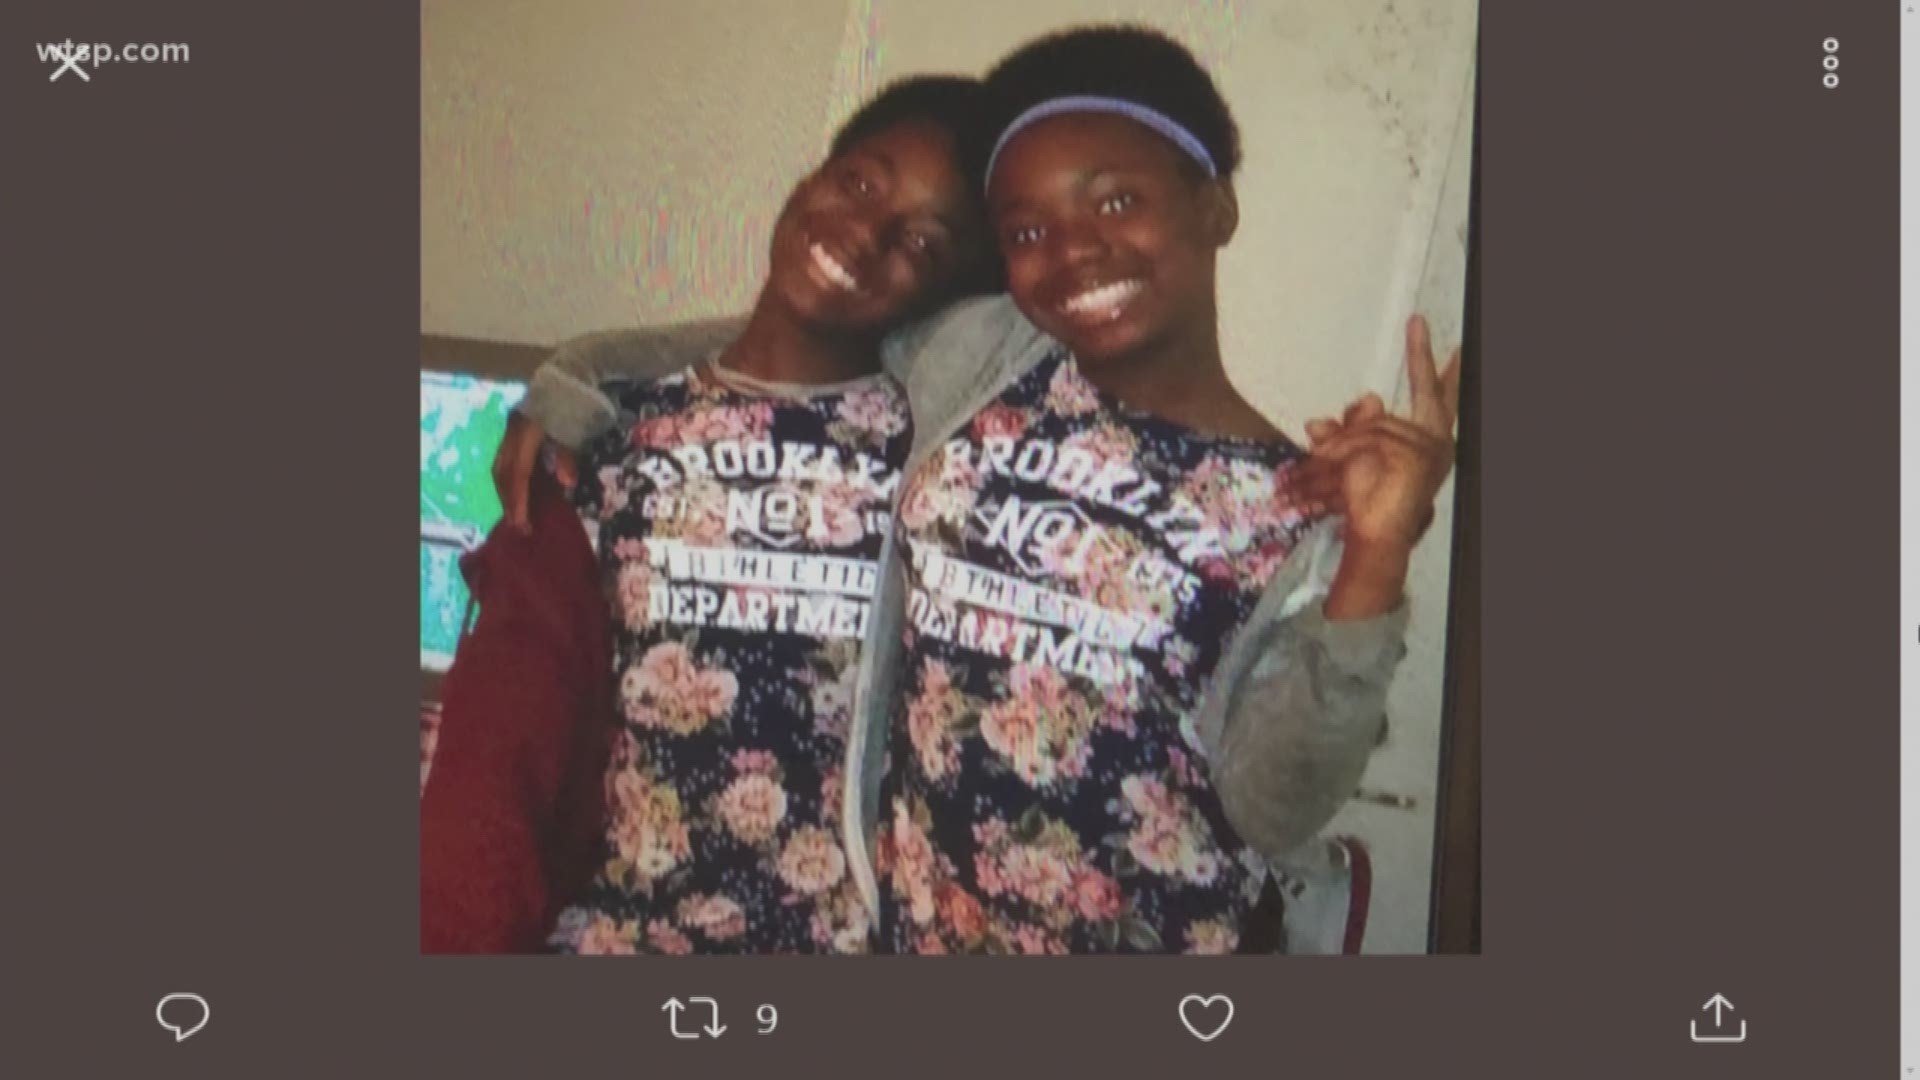 Police are asking for the public to help find missing 11-year-old twins.

John Hopkins Middle School students Brenika and Brentasia Newton both had on burgundy polo shirts, police said. One was wearing khaki shorts and one was wearing khaki pants.